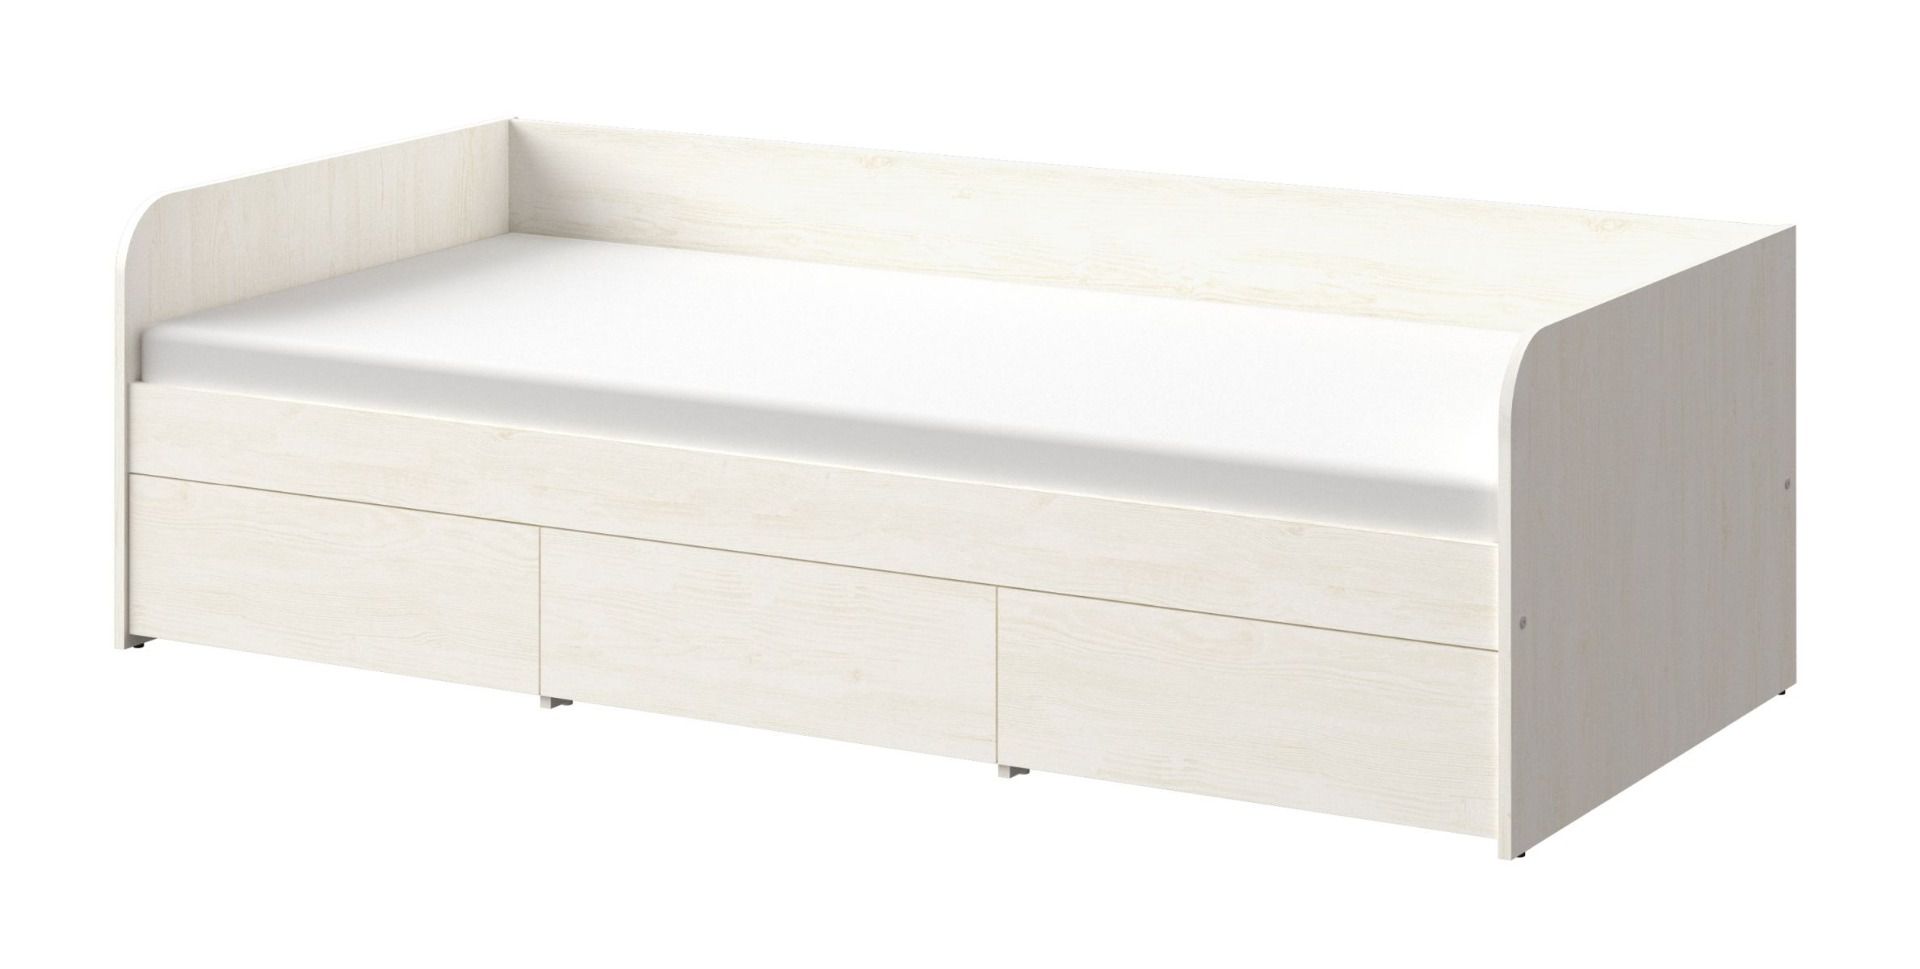 Single bed / guest bed with 3 drawers Schleie 04, color: pine white - lying surface: 90 x 200 cm (W x L)